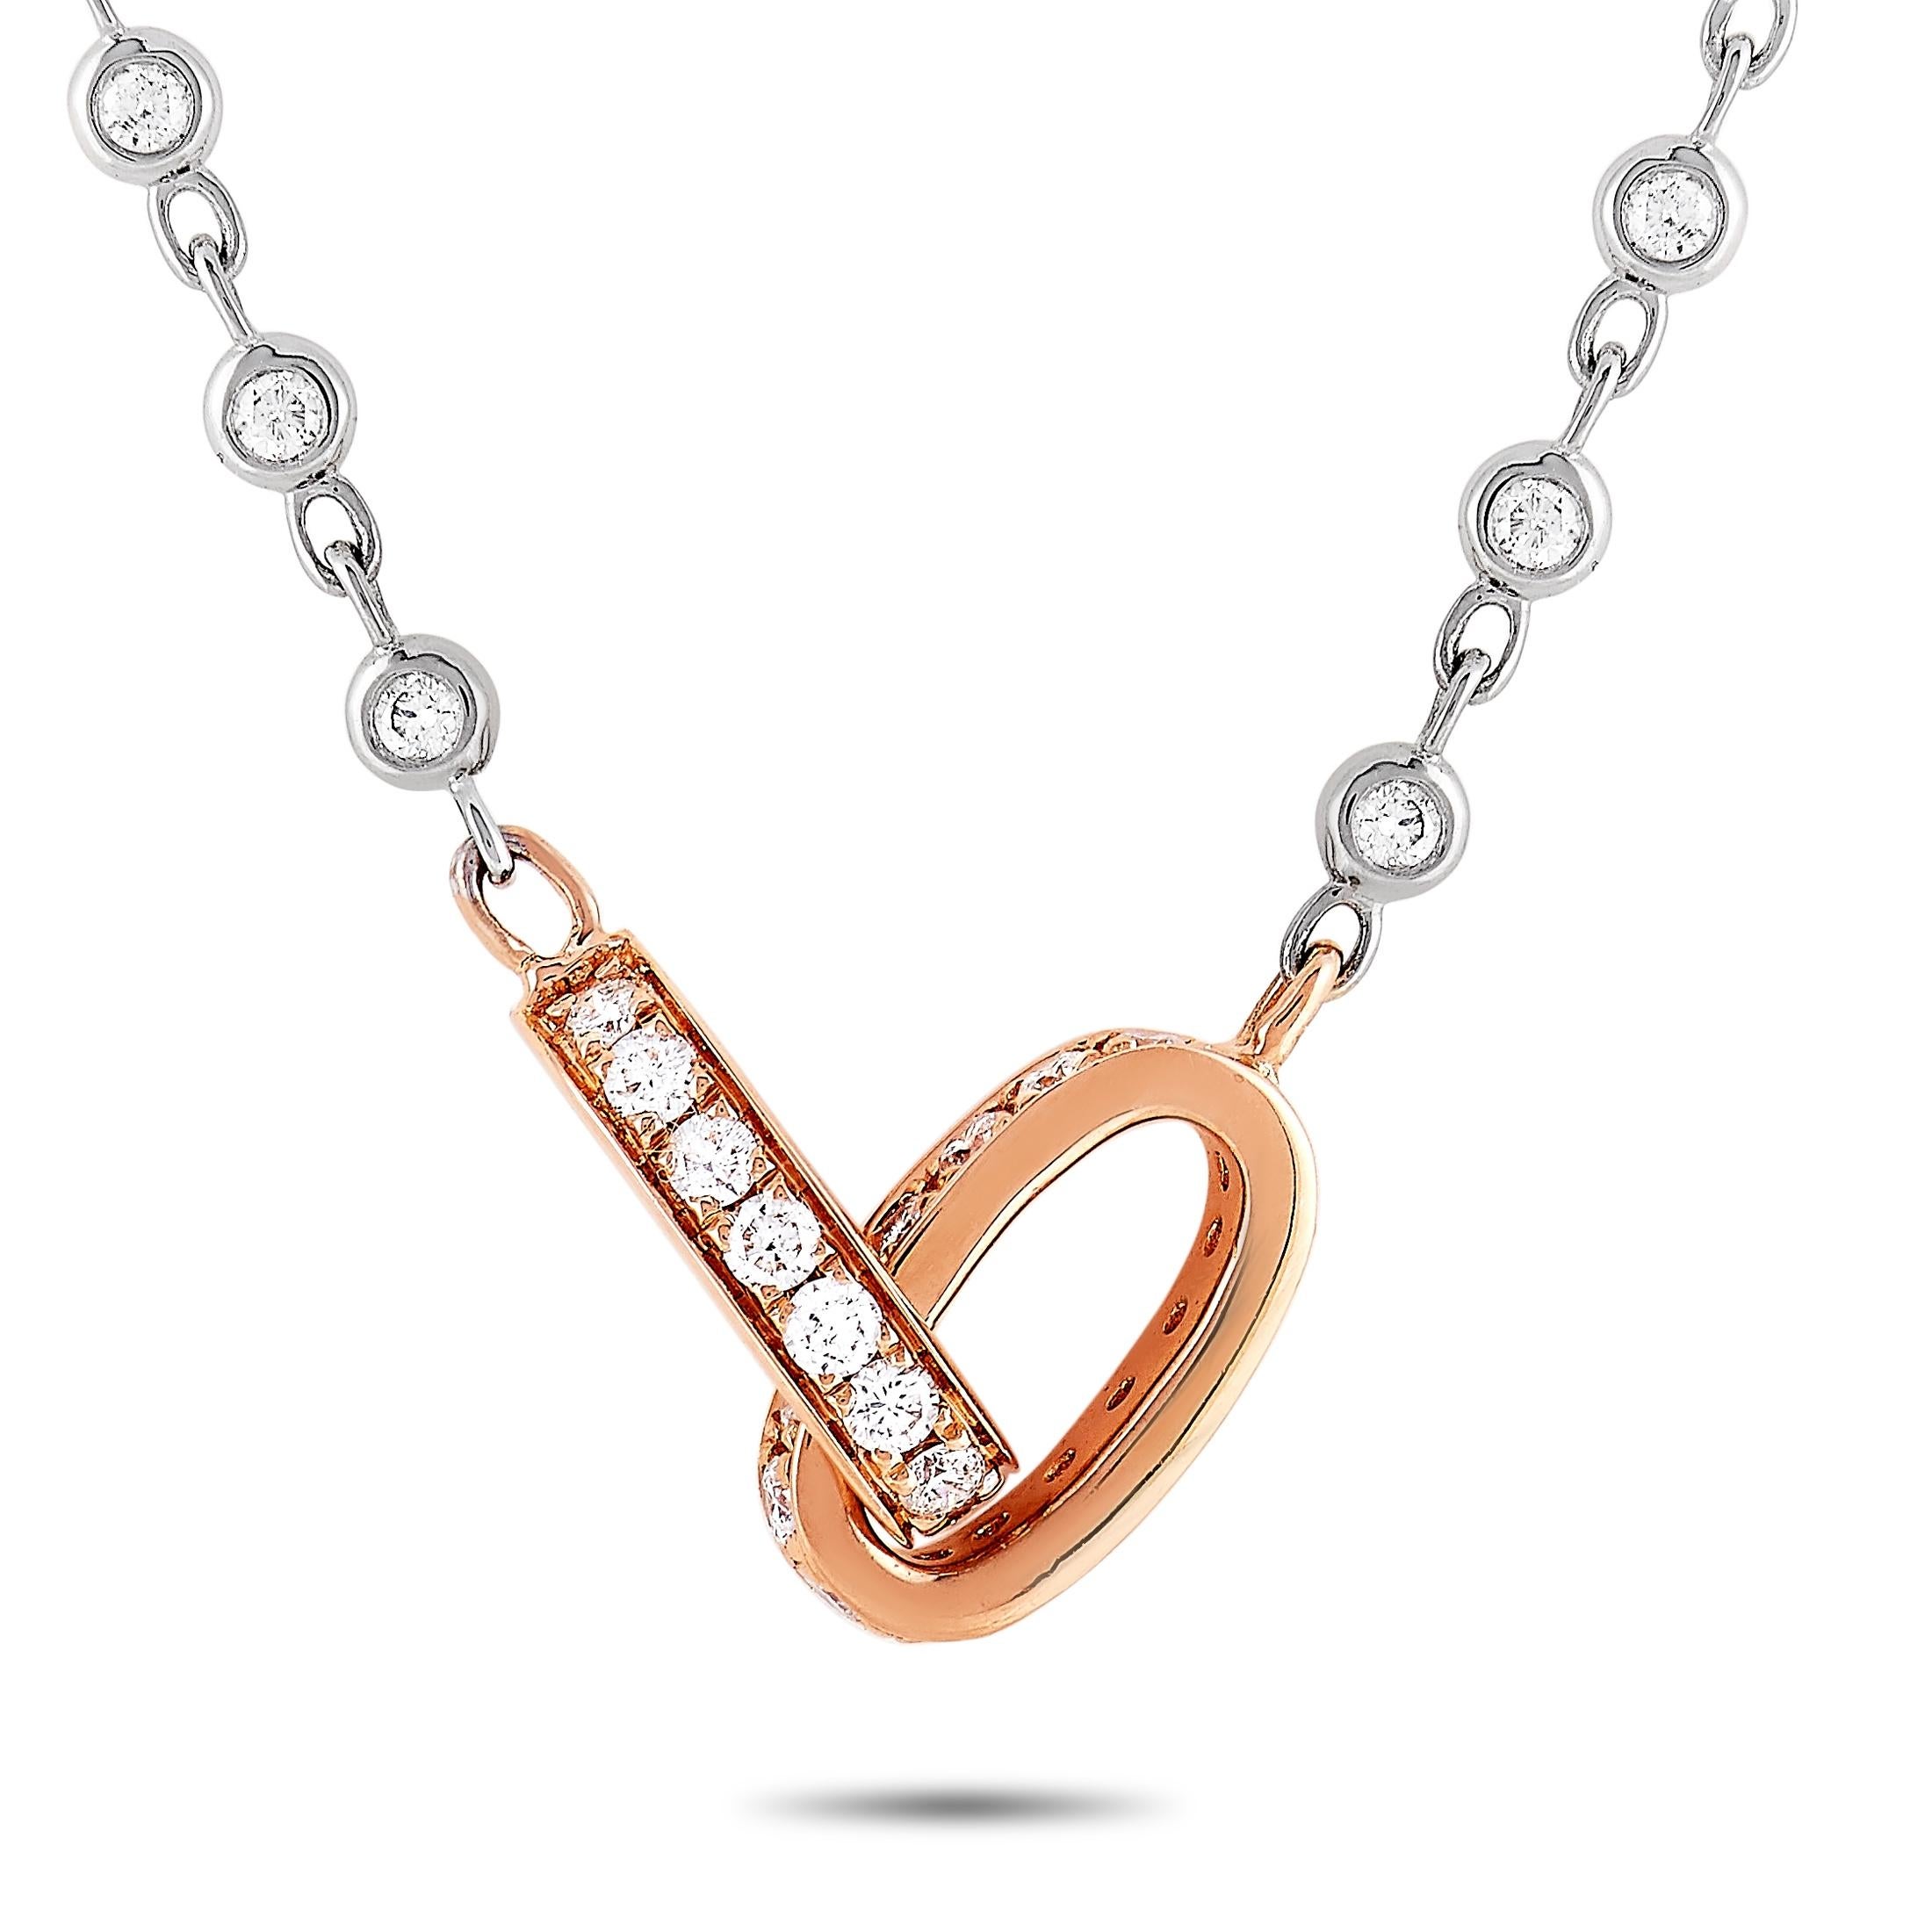 This LB Exclusive sautoir necklace is made out of 18K white and rose gold and embellished with diamonds that total 3.90 carats. The necklace weighs 18.9 grams and measures 30” in length.
 
 Offered in brand new condition, this jewelry piece